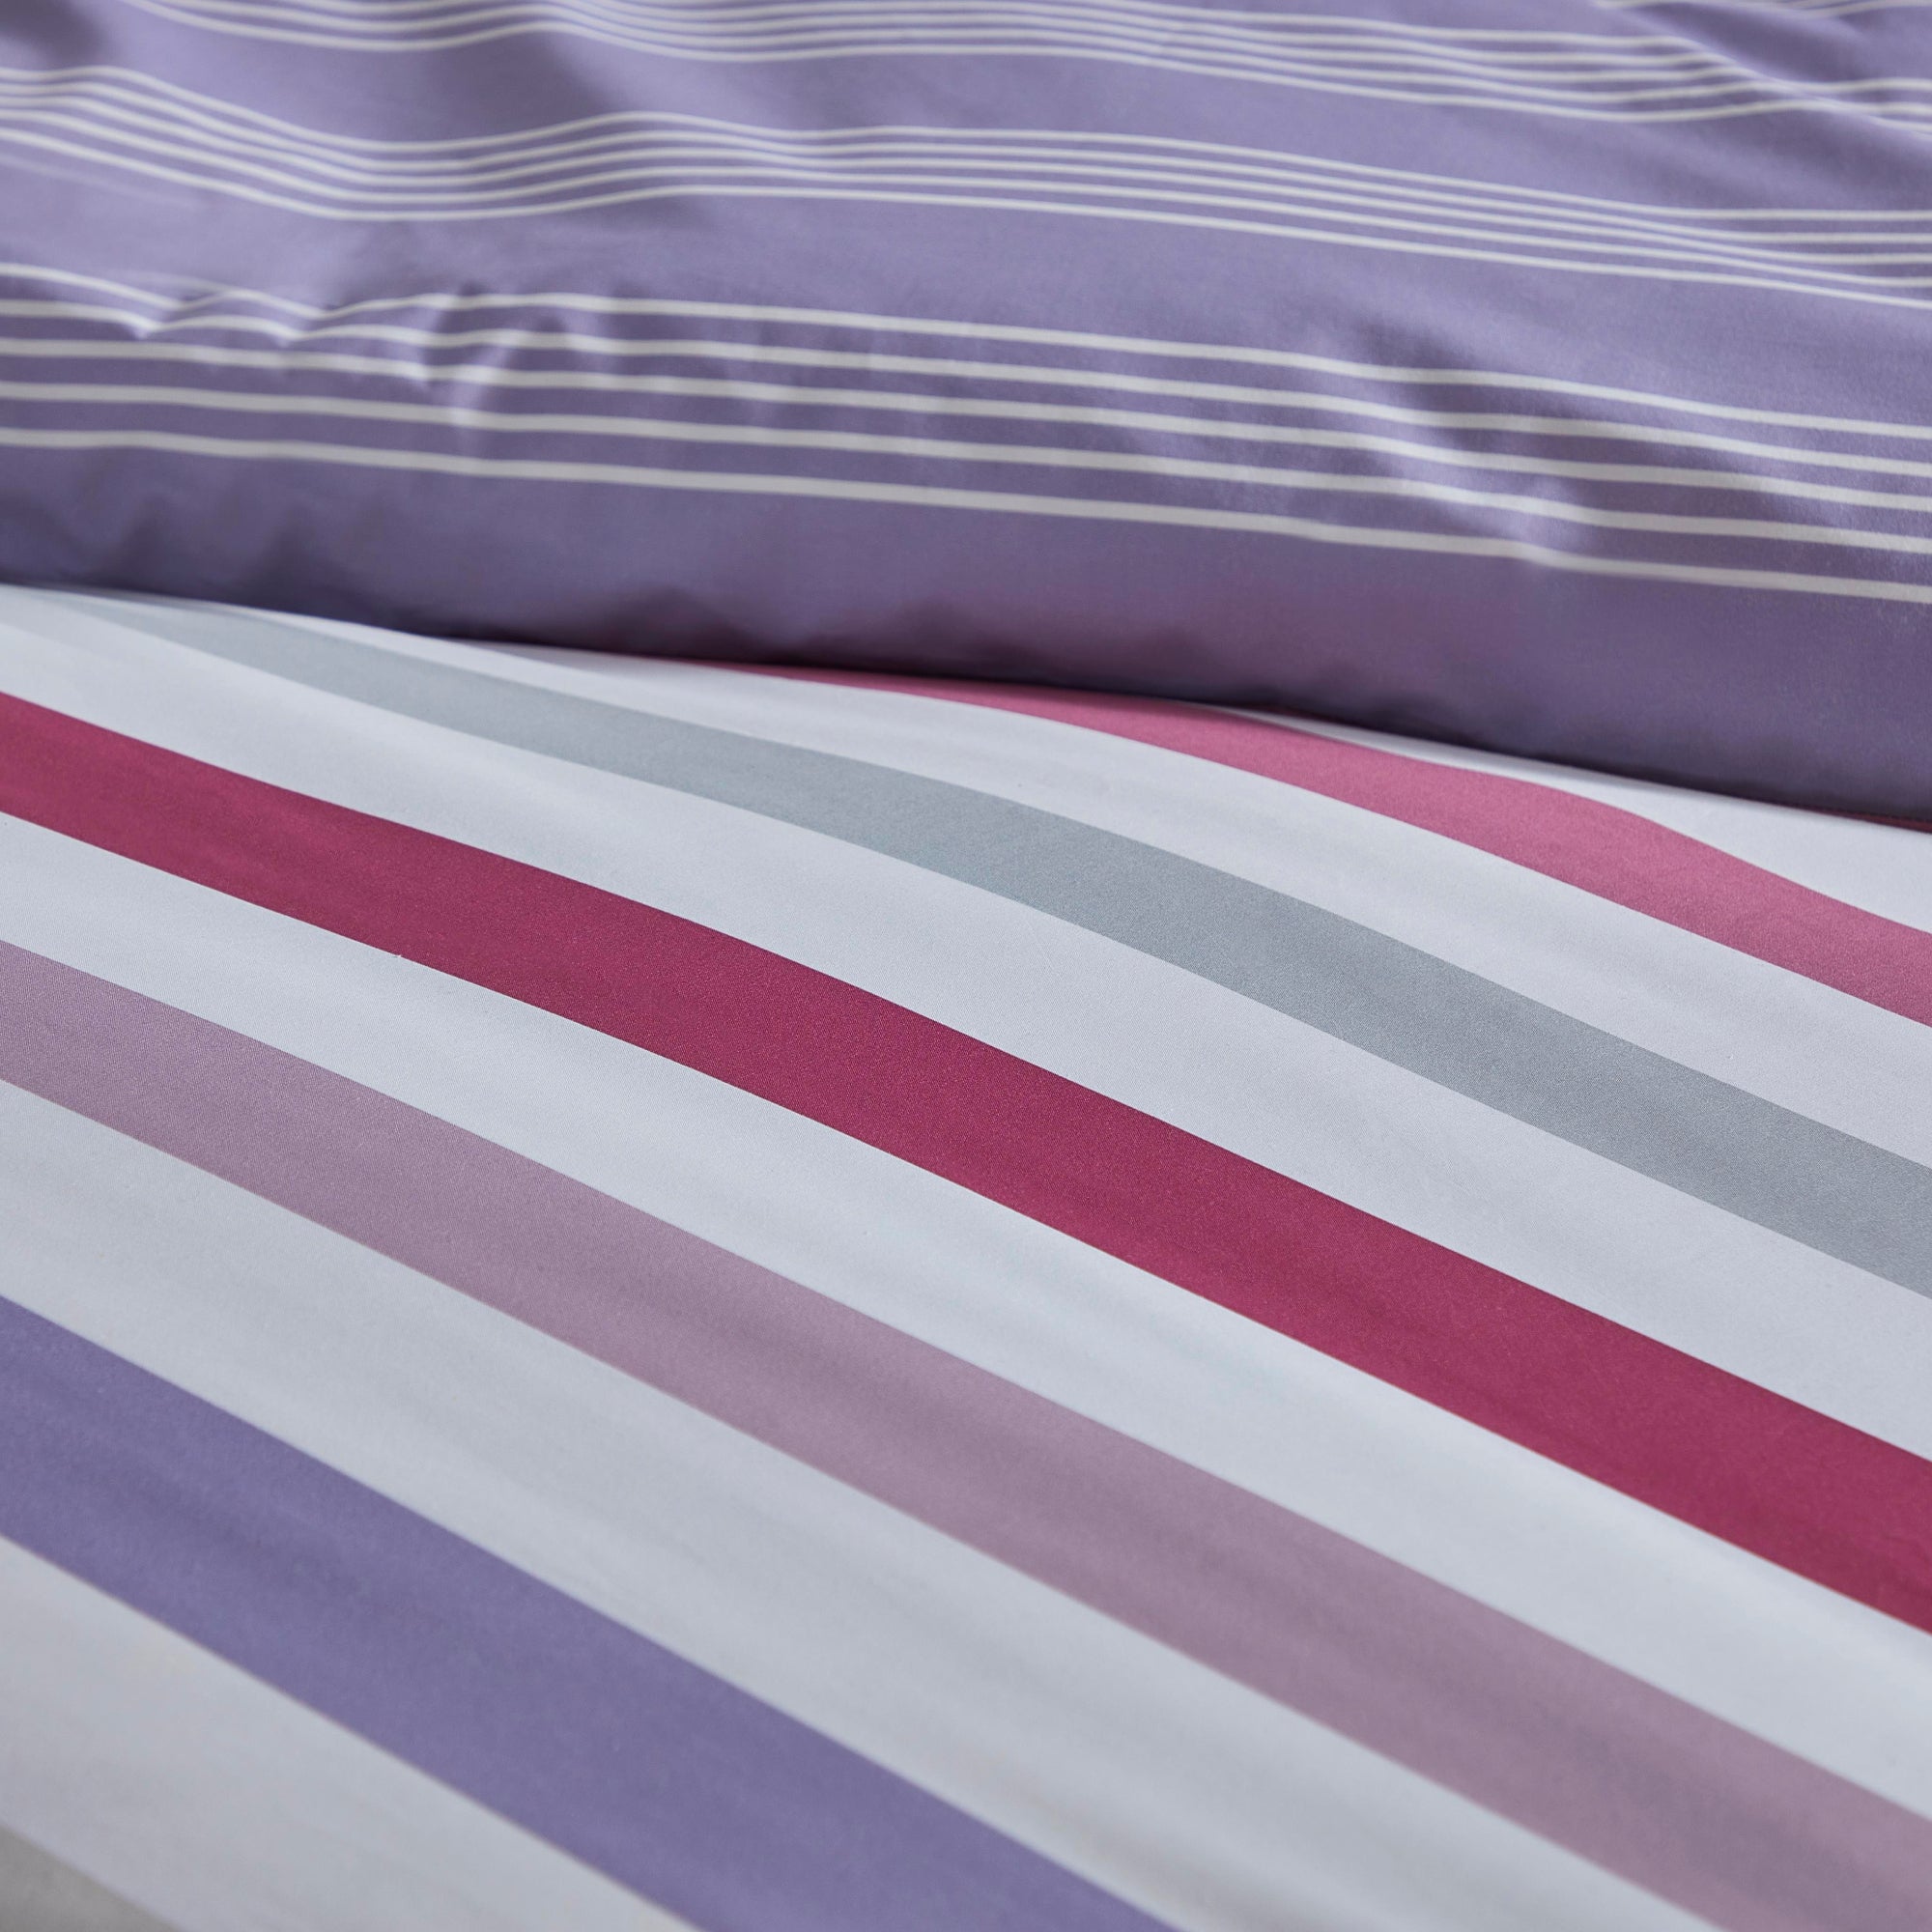 Duvet Cover Set Carlson Stripe by Fusion in Lilac